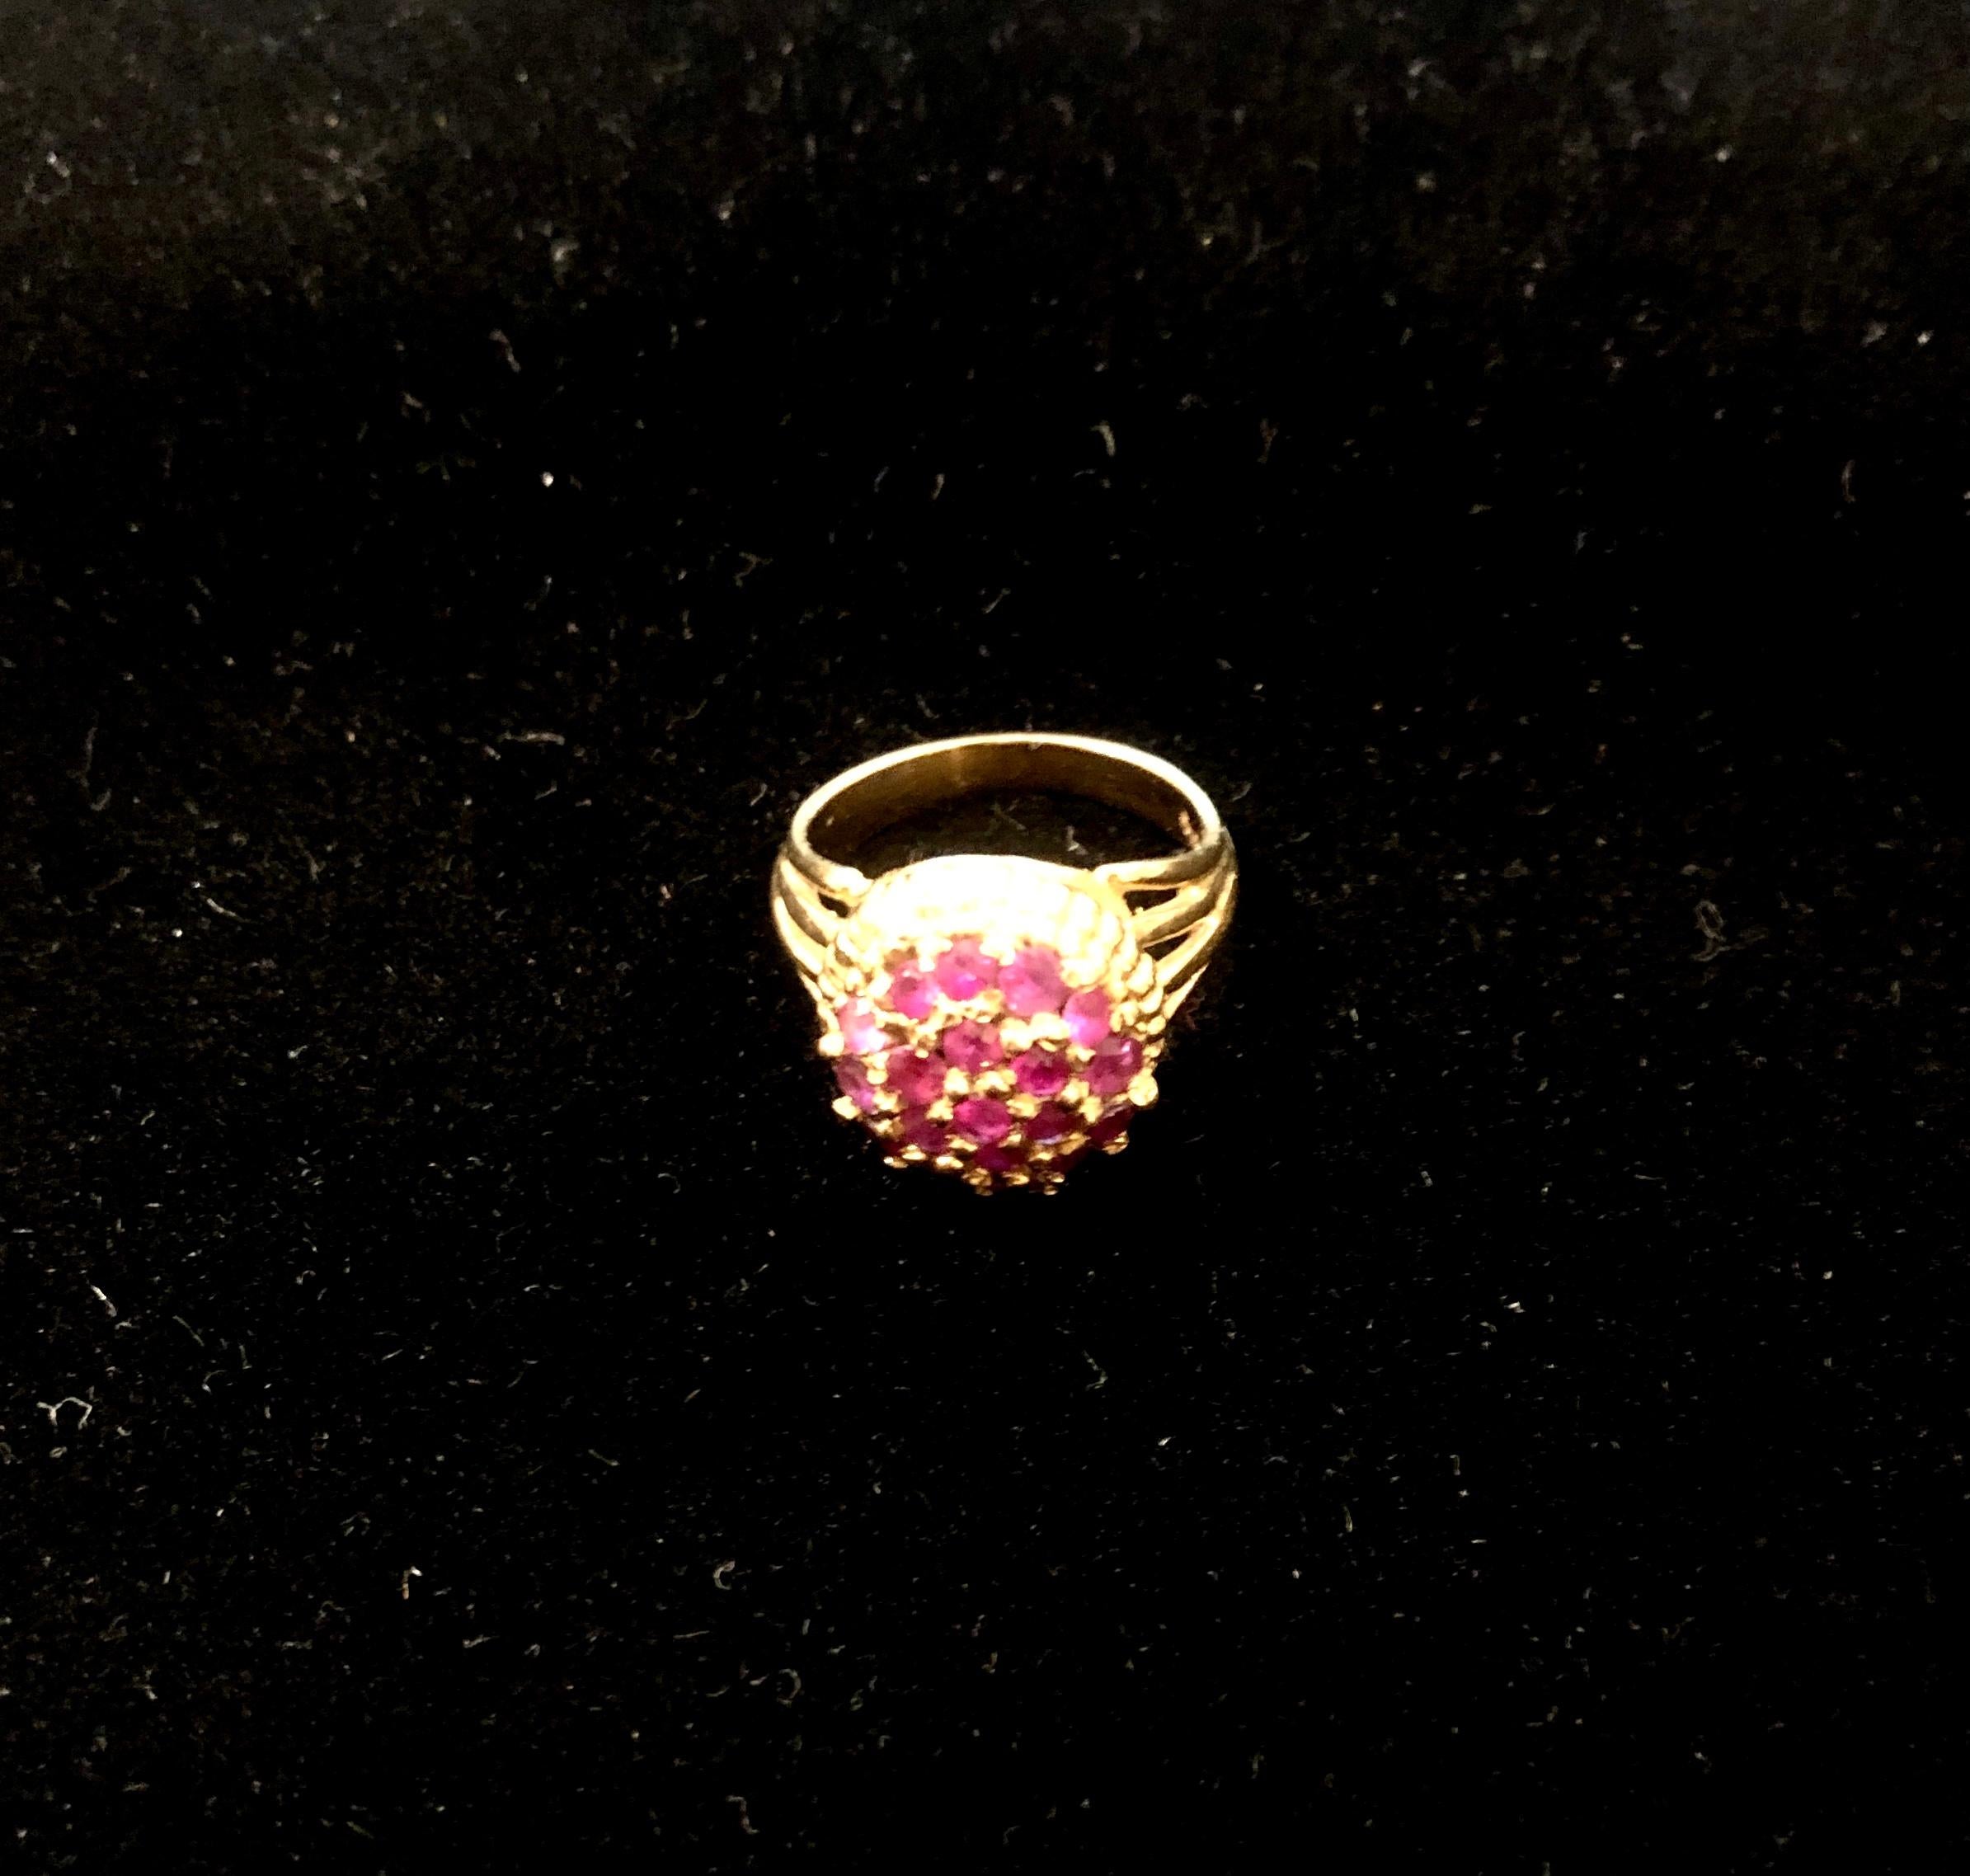 18 k yellow gold cocktail ring with natural rubys set in a bombe design, ca 1960
Size 6 (Diameter 16 mm)